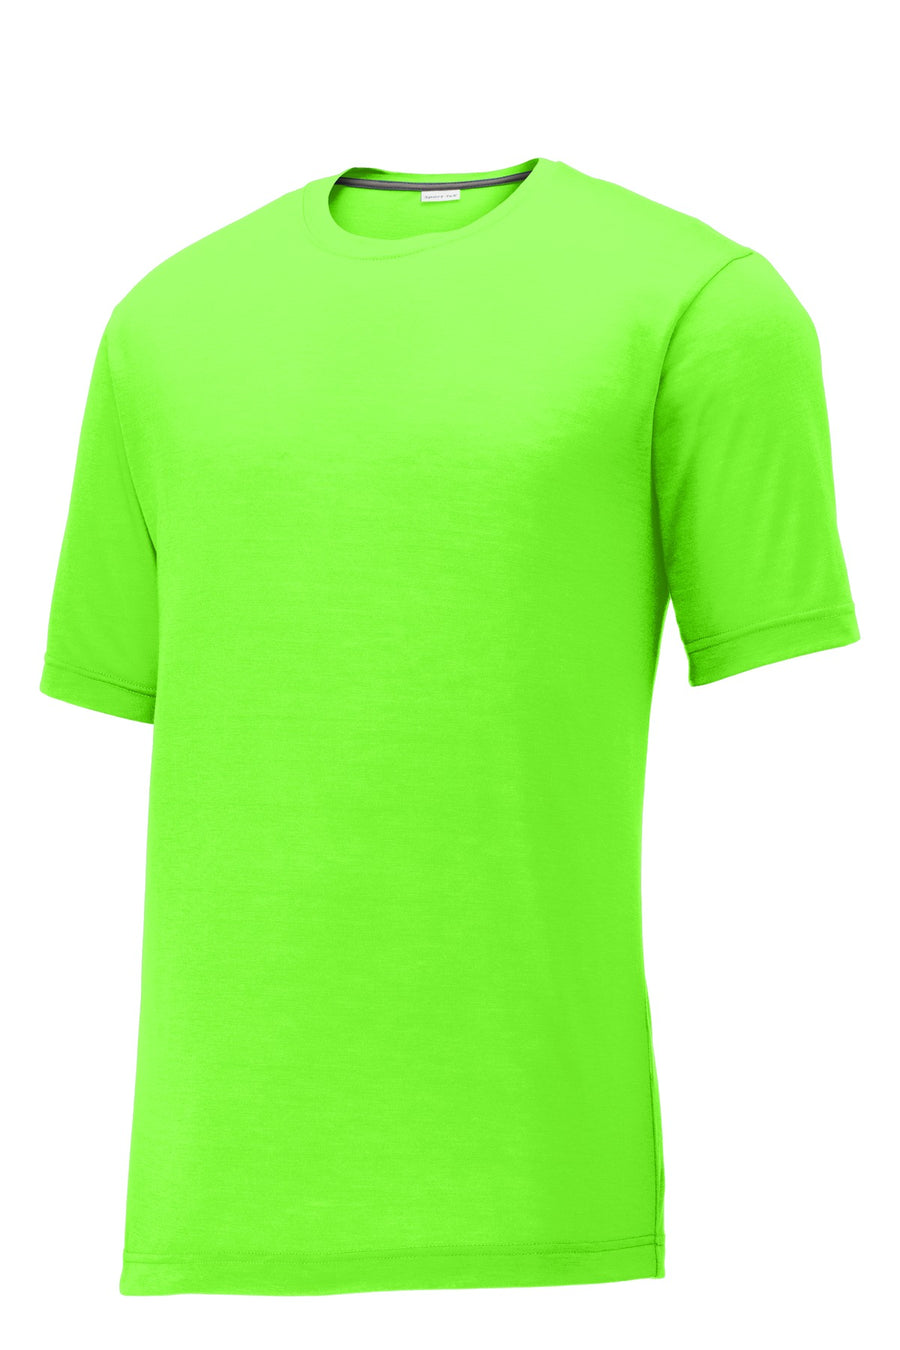 ST450-Neon Green-front_flat